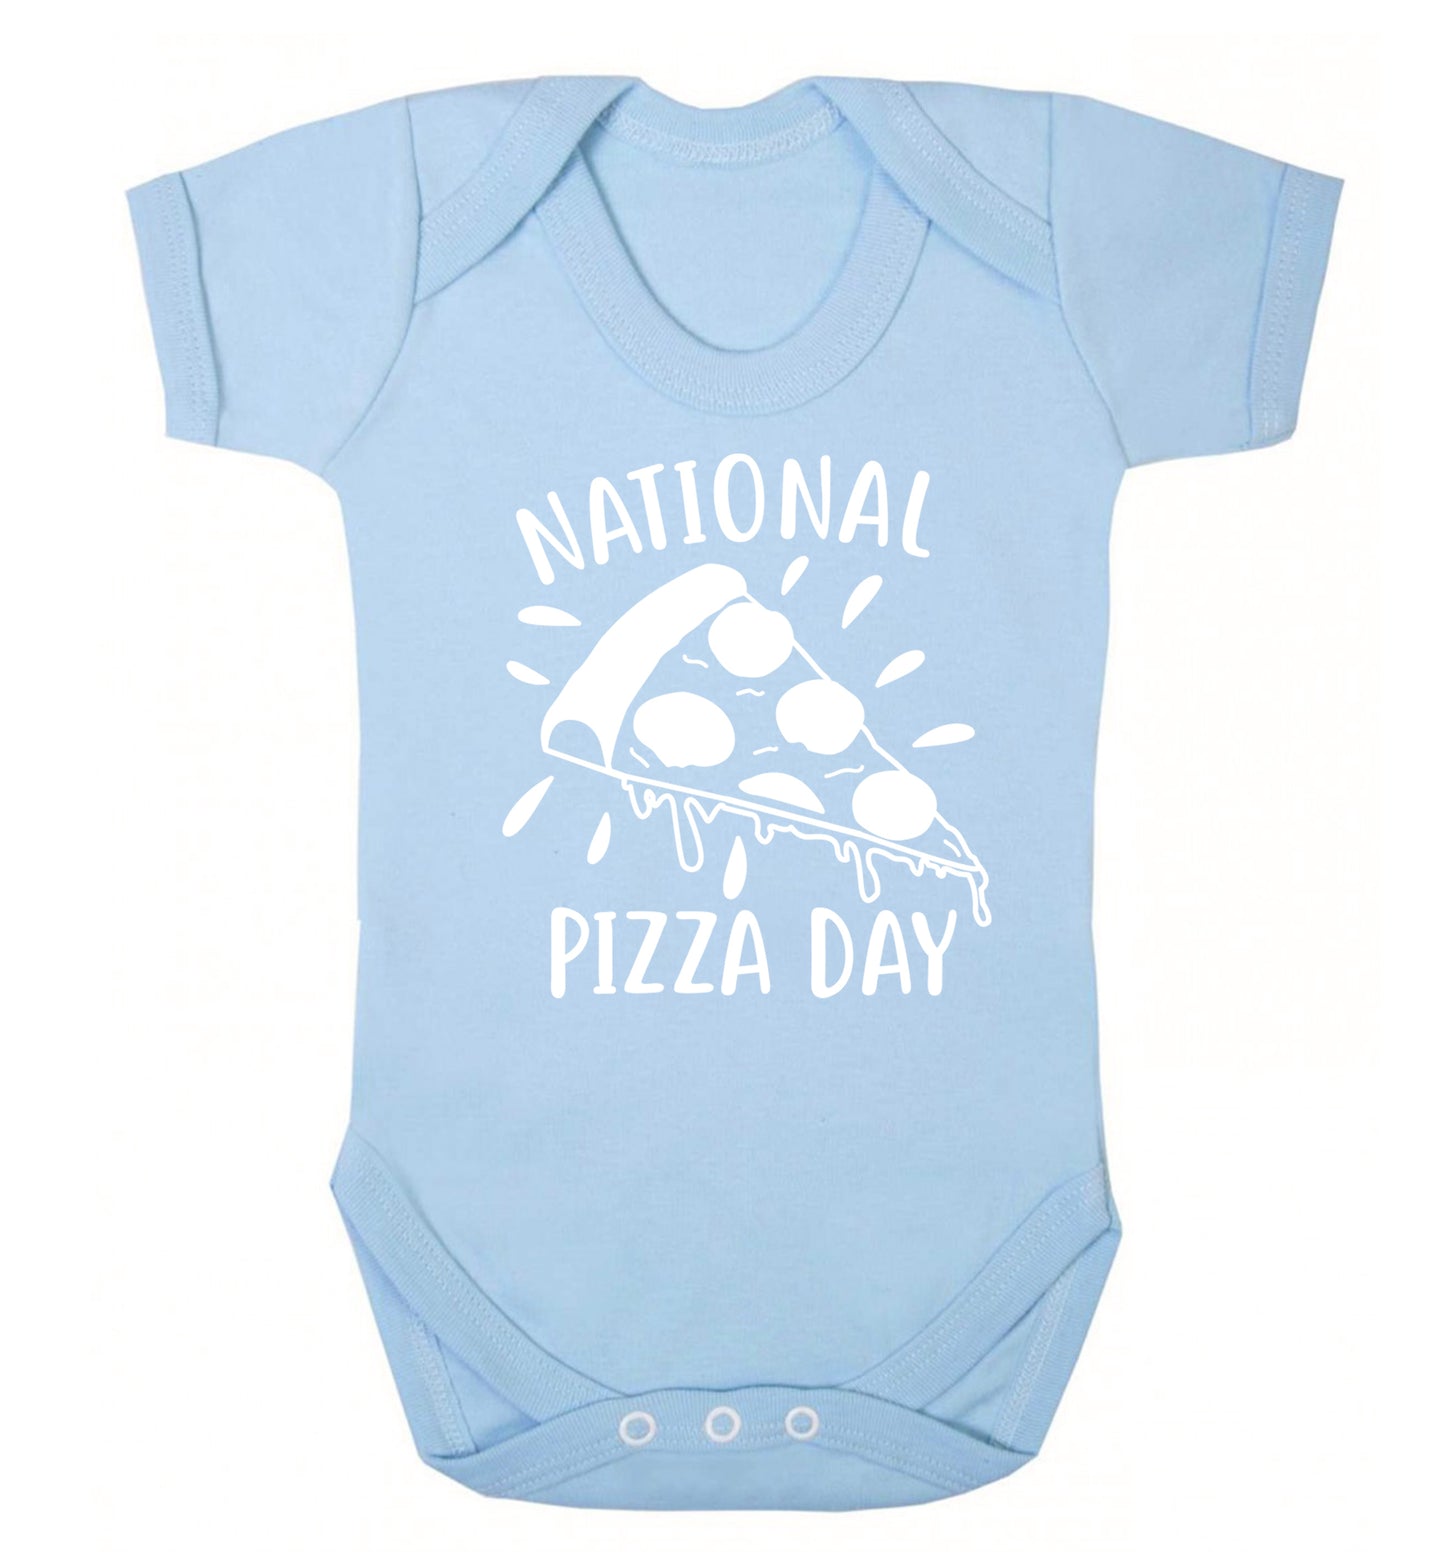 National pizza day Baby Vest pale blue 18-24 months